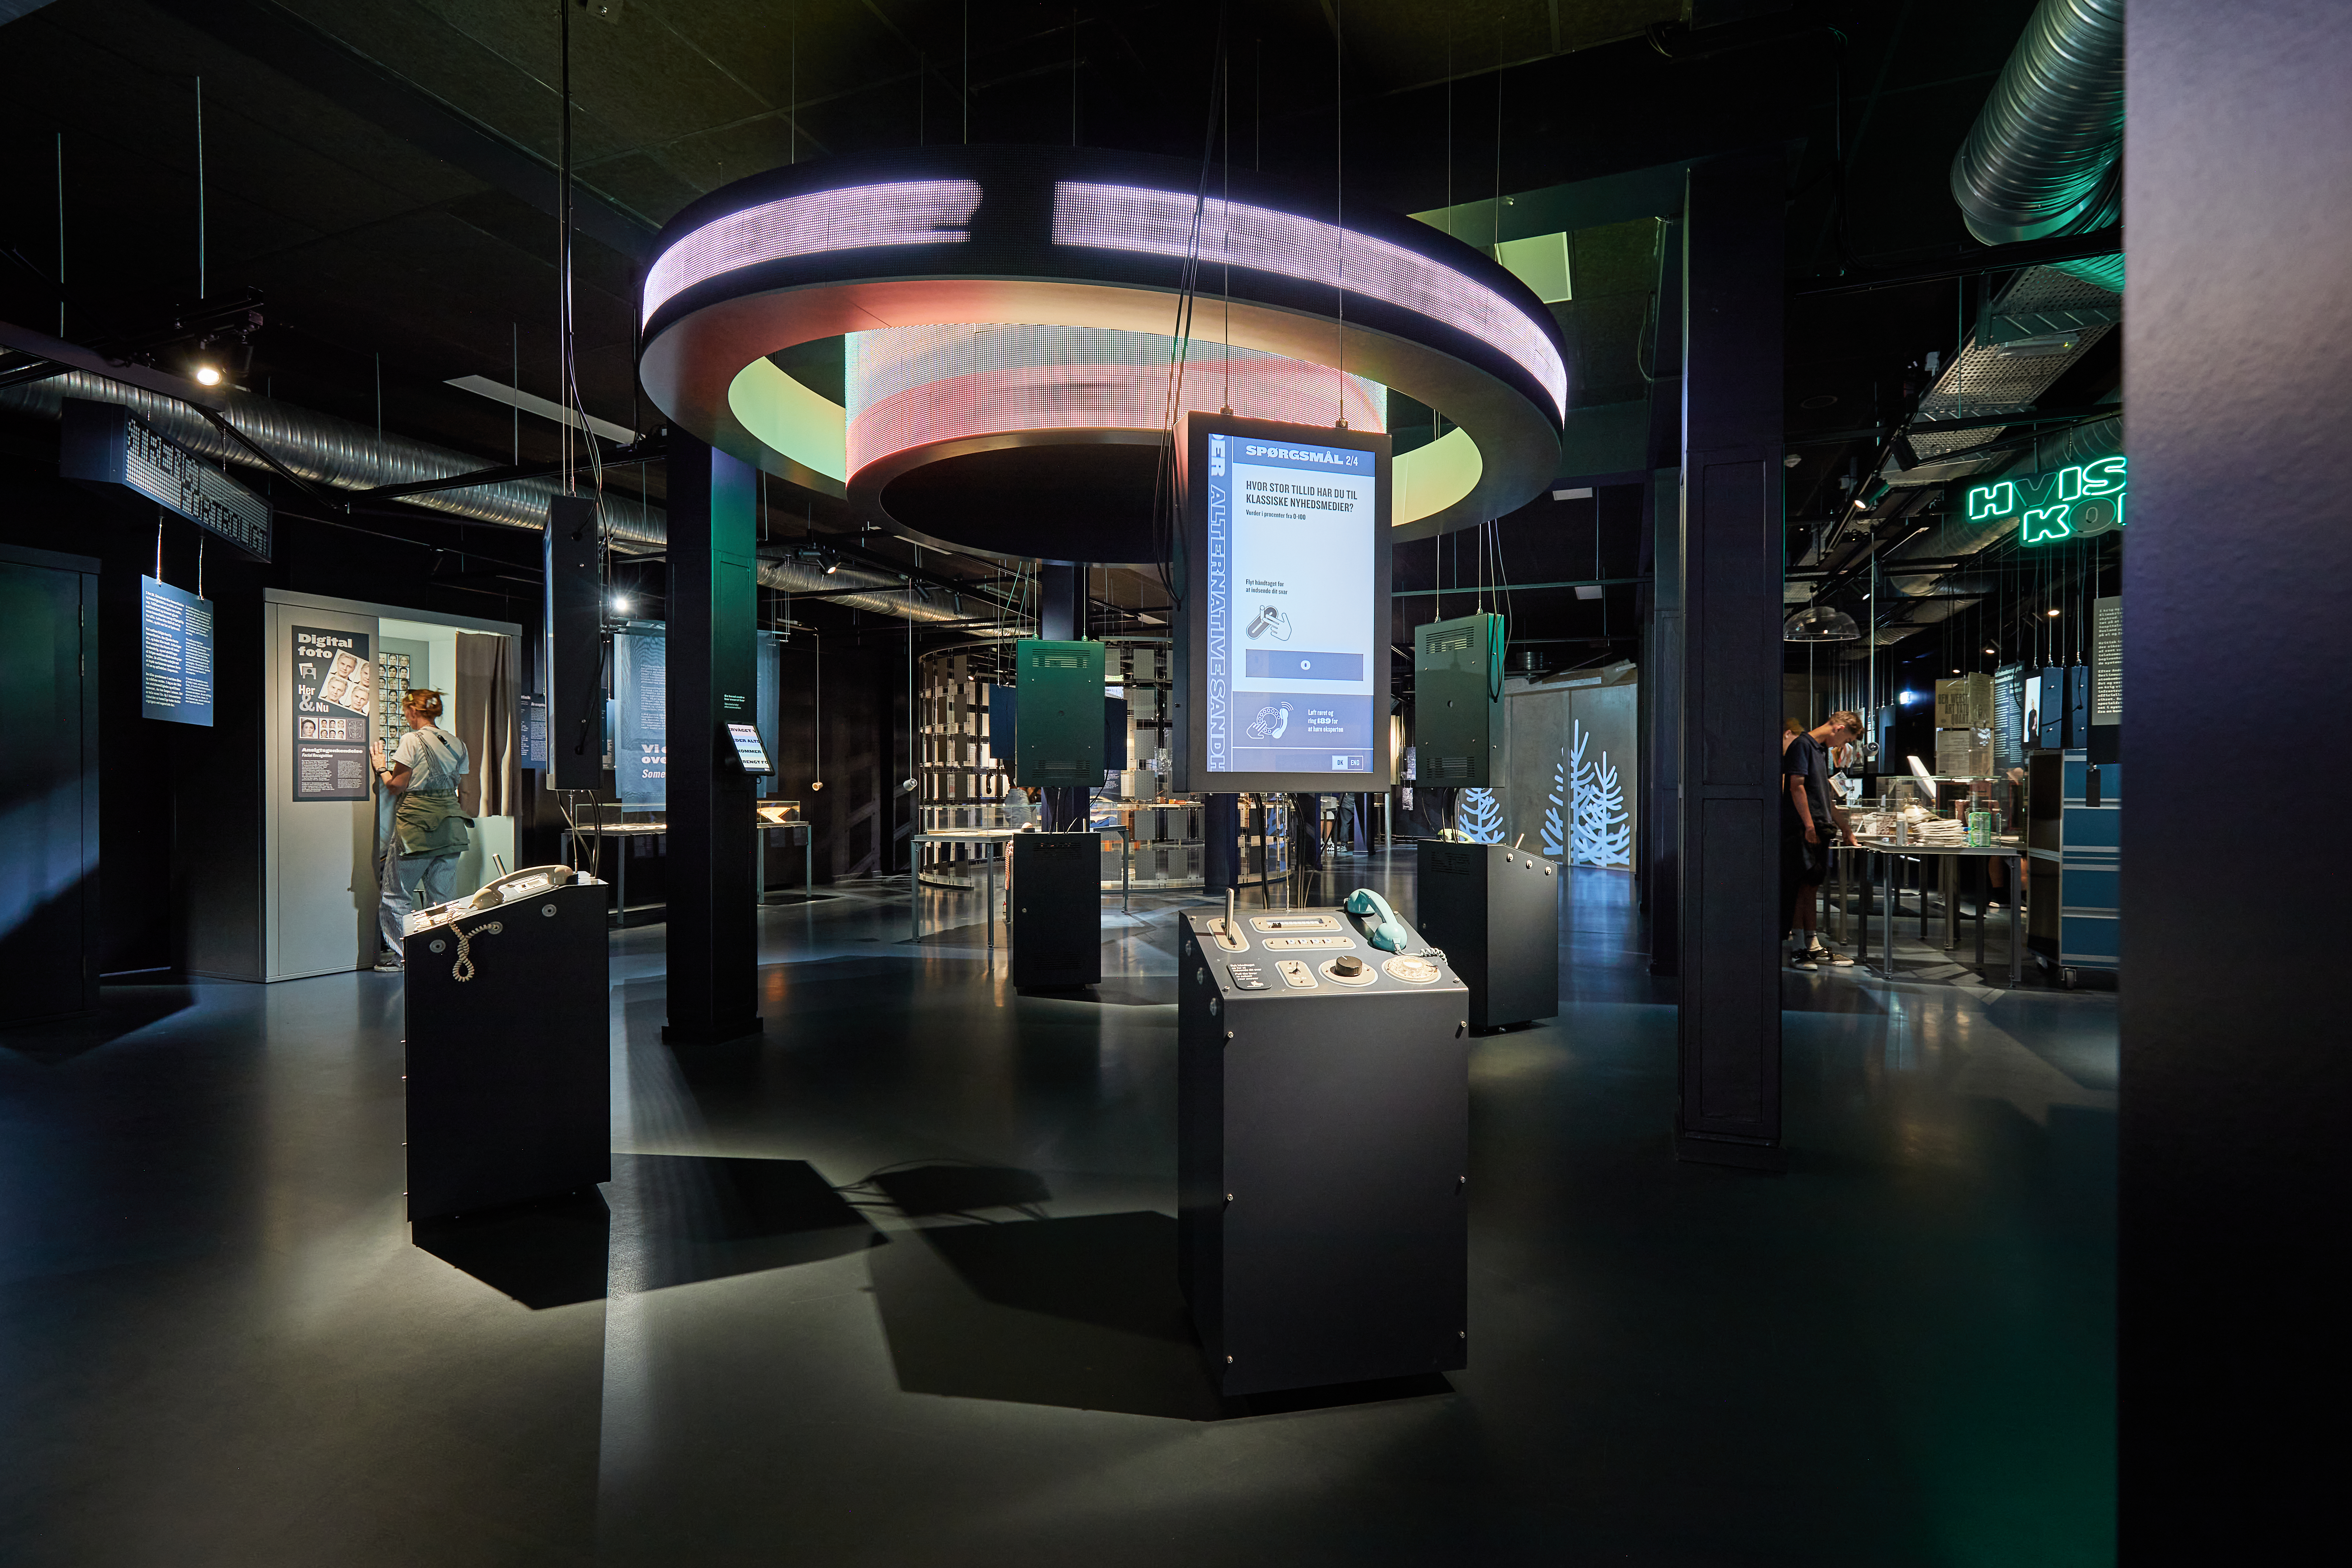 The exhibition provides a glimpse into the history of communication, connects it to the present, and aims to stimulate reflection on the future.